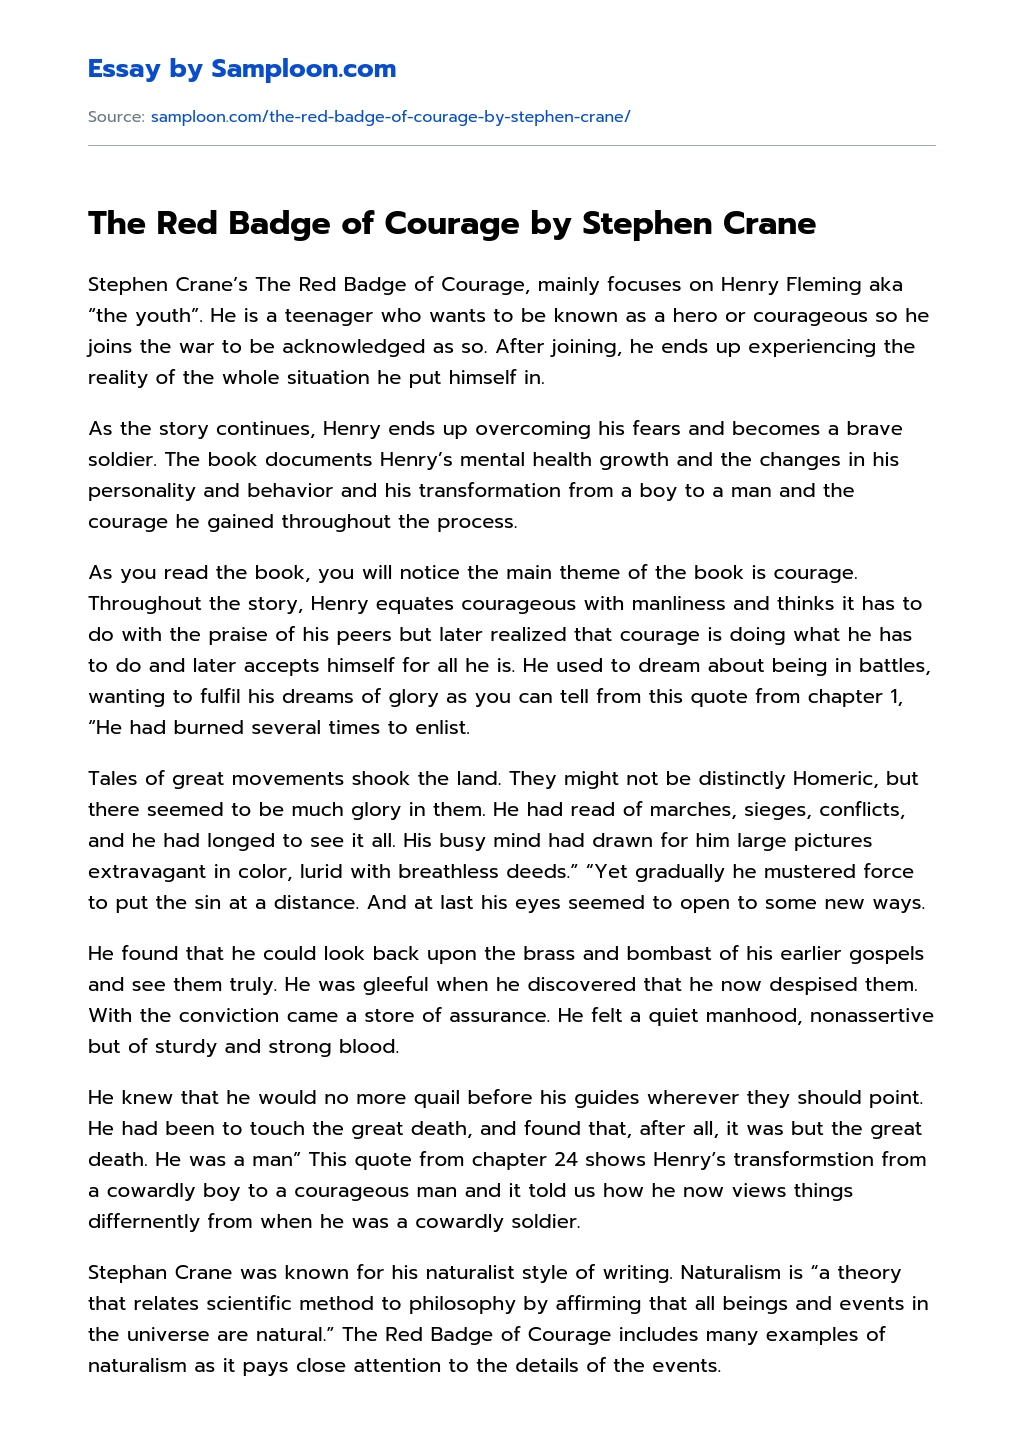 The Red Badge of Courage by Stephen Crane essay